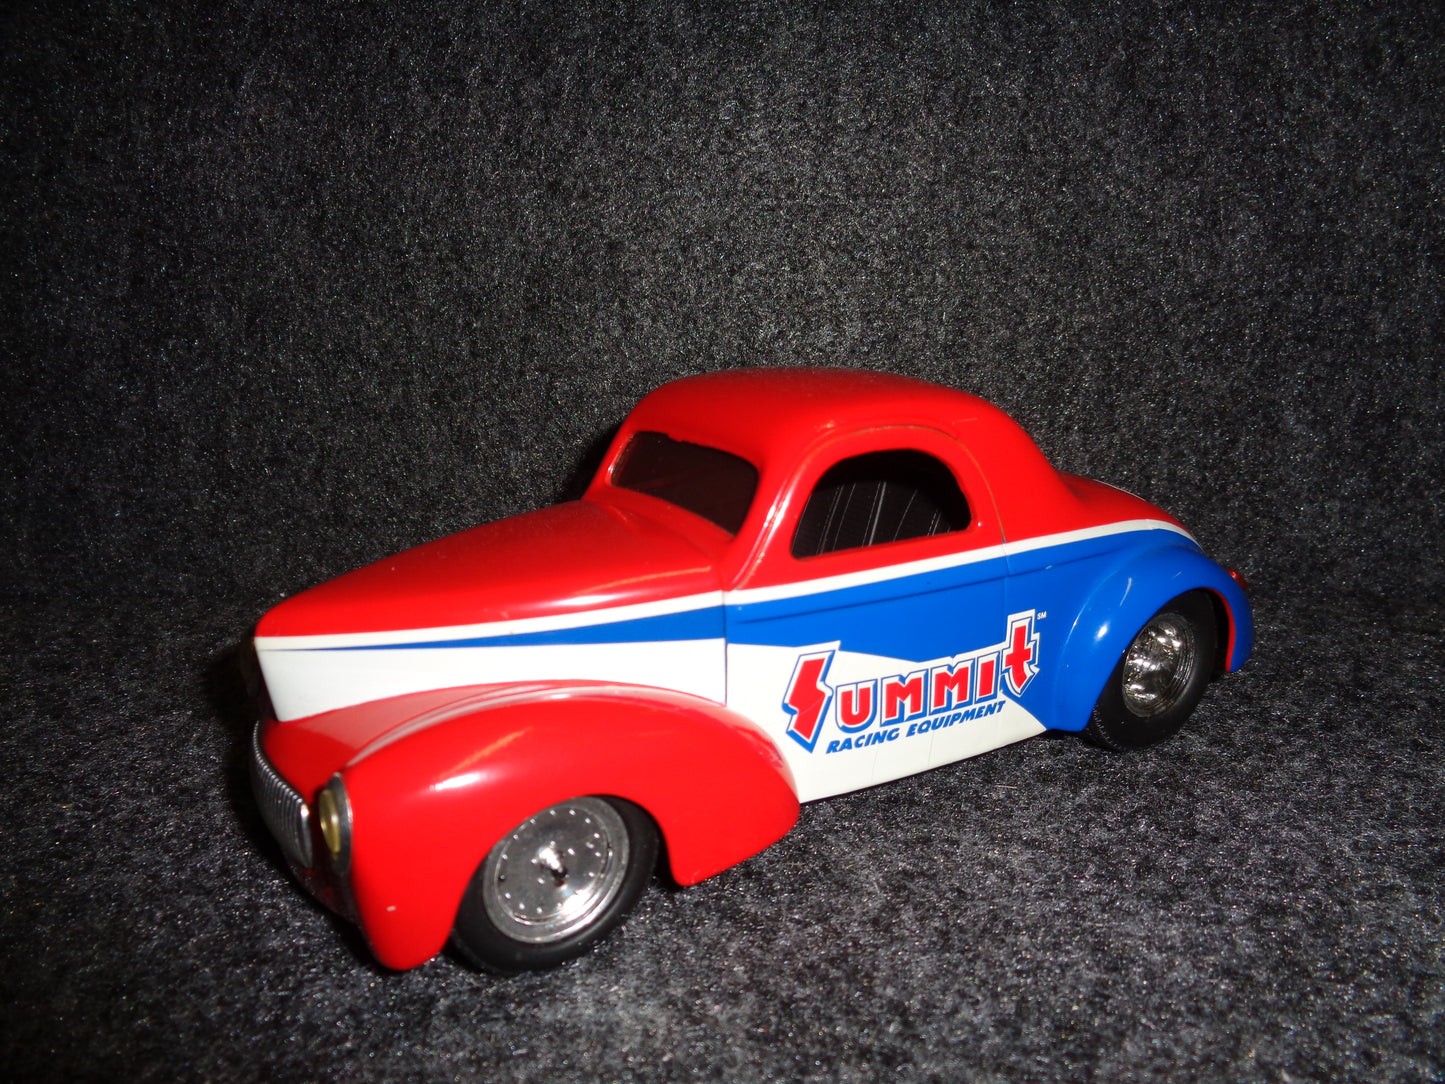 Summit Racing Equipment 1941 Willys Coupe Street Rod